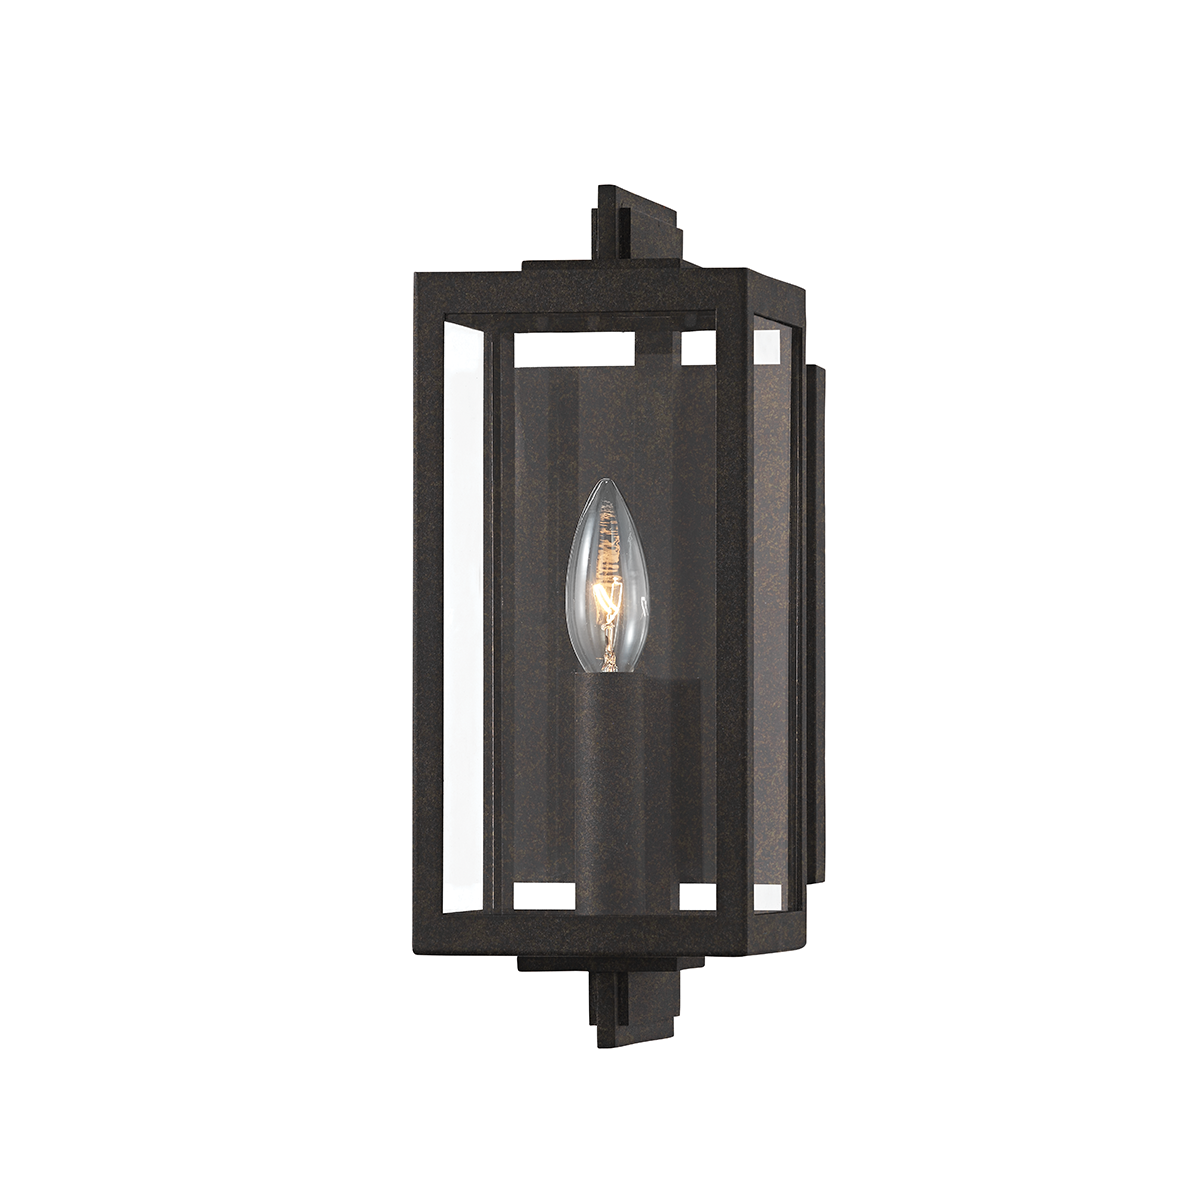 Troy Lighting 1 LIGHT EXTERIOR WALL SCONCE B5511 Outdoor l Wall Troy Lighting FRENCH IRON  